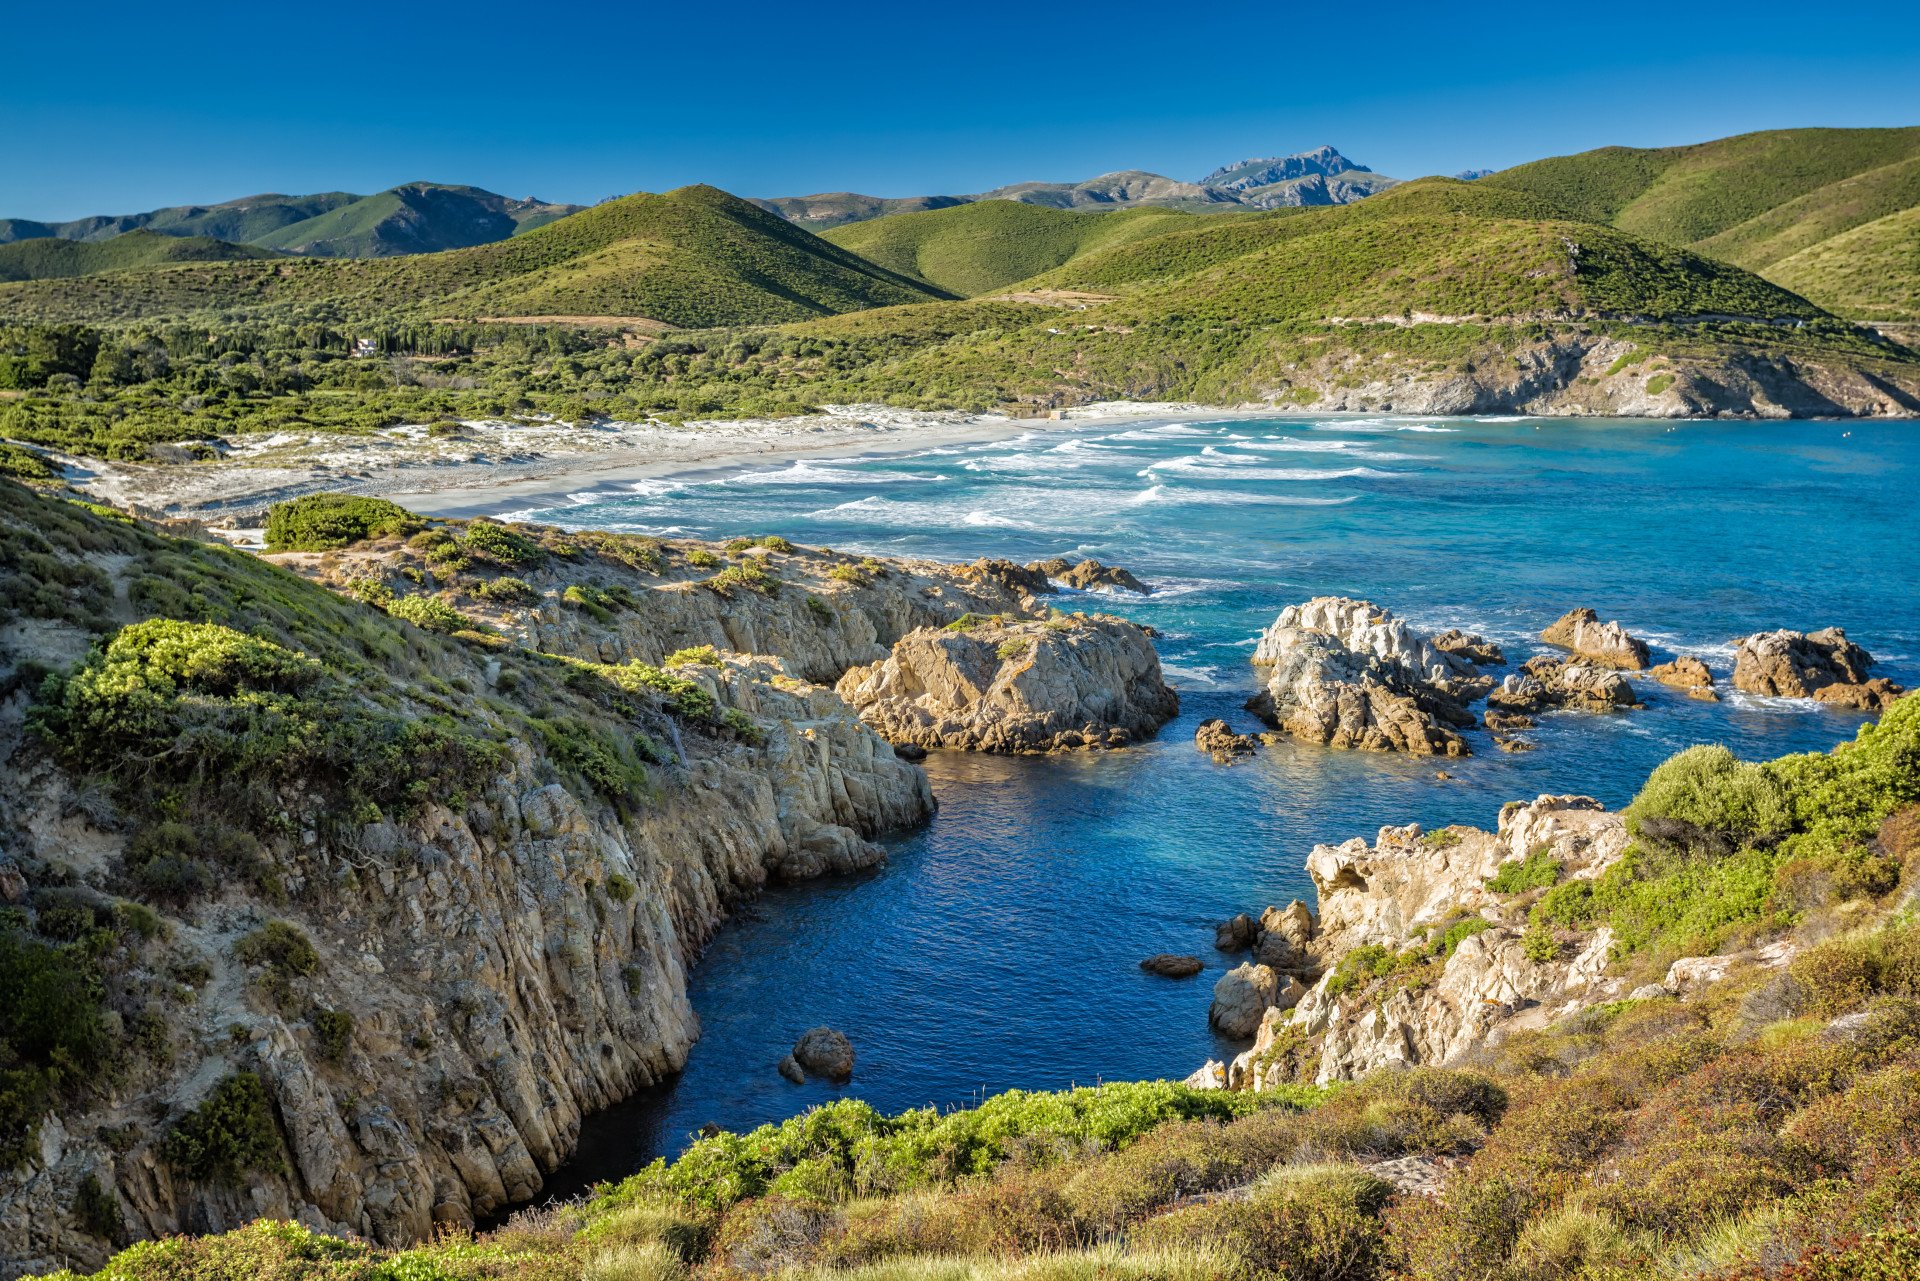 North Corsican Wonders Between Coast and Mountains